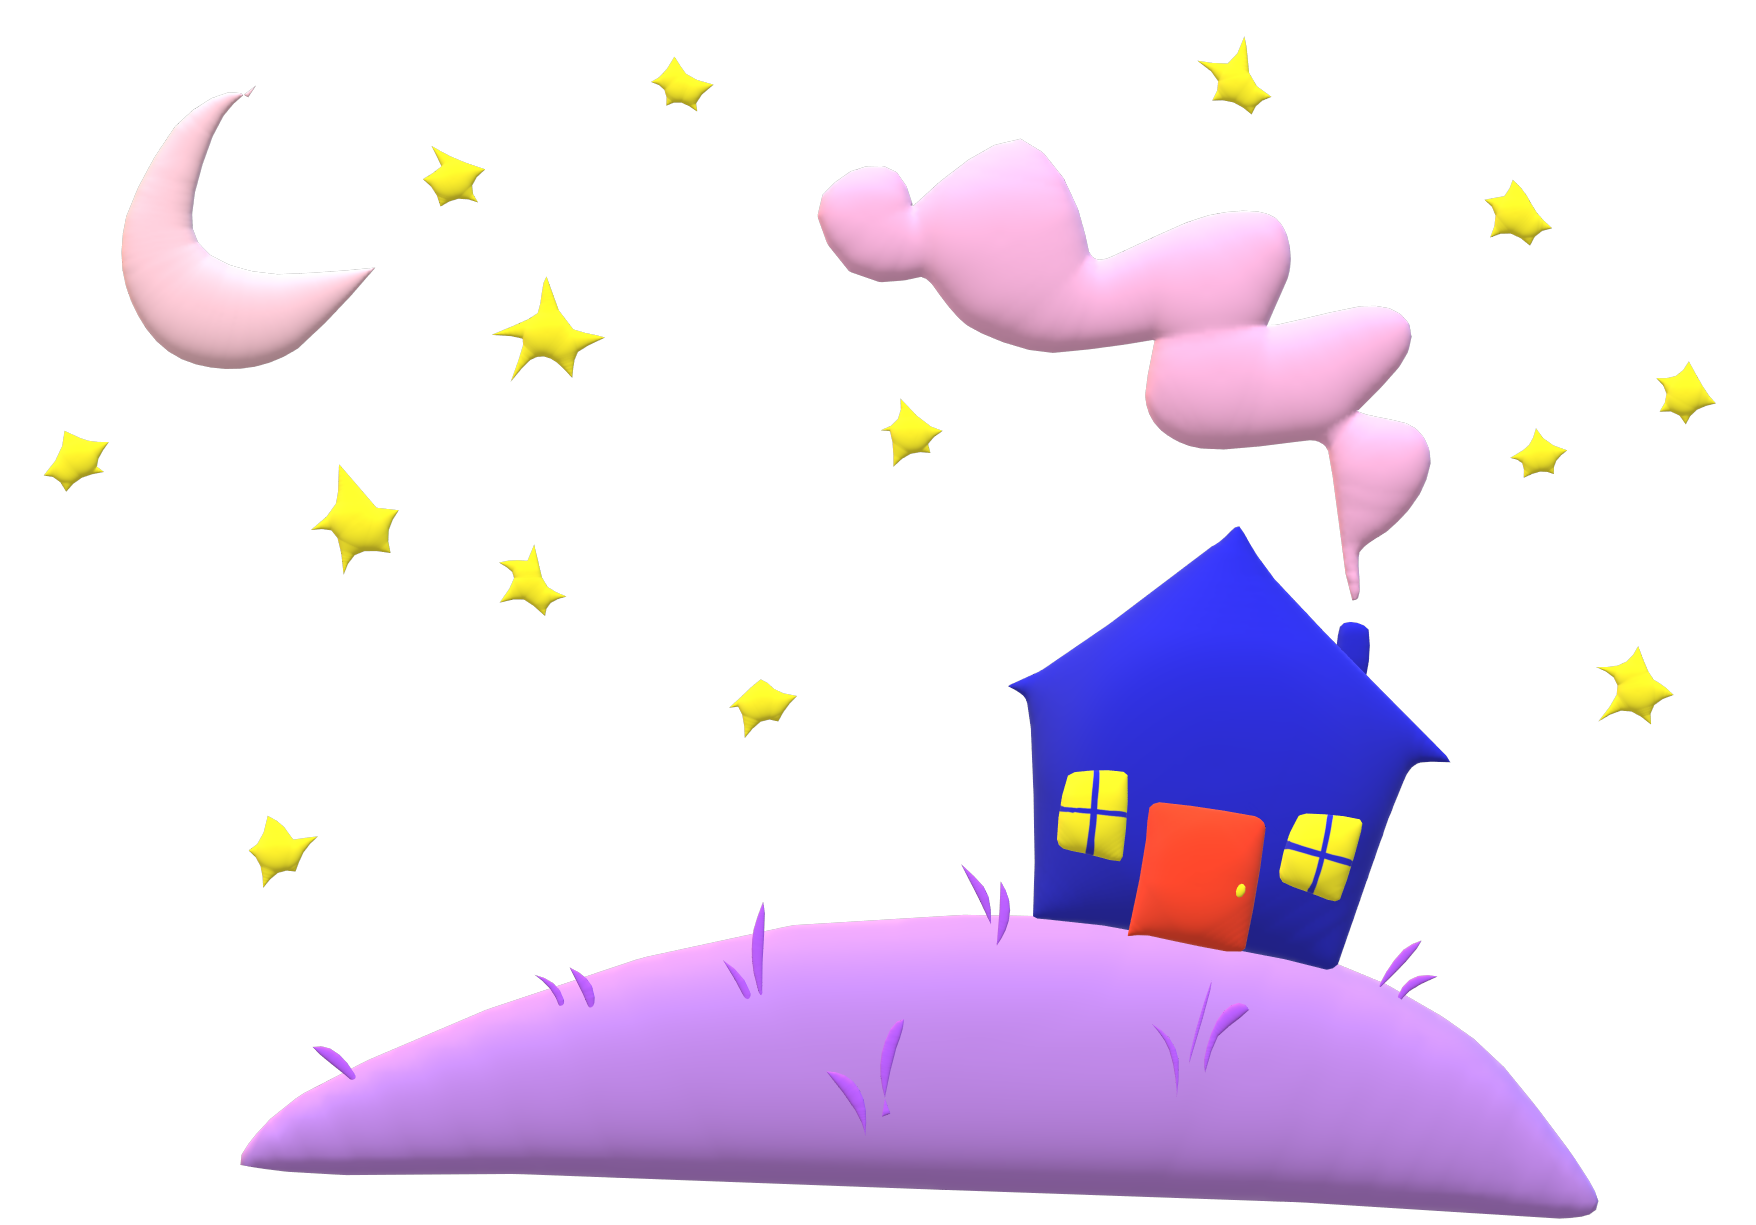 A transparent Paint 3D render of a small blue house on a lavender hill. There are a few light yellow stars  and a light purple moon beside the house, where the sky would be. There is a light purple cloud of steam rising up out of the house's chimmney.